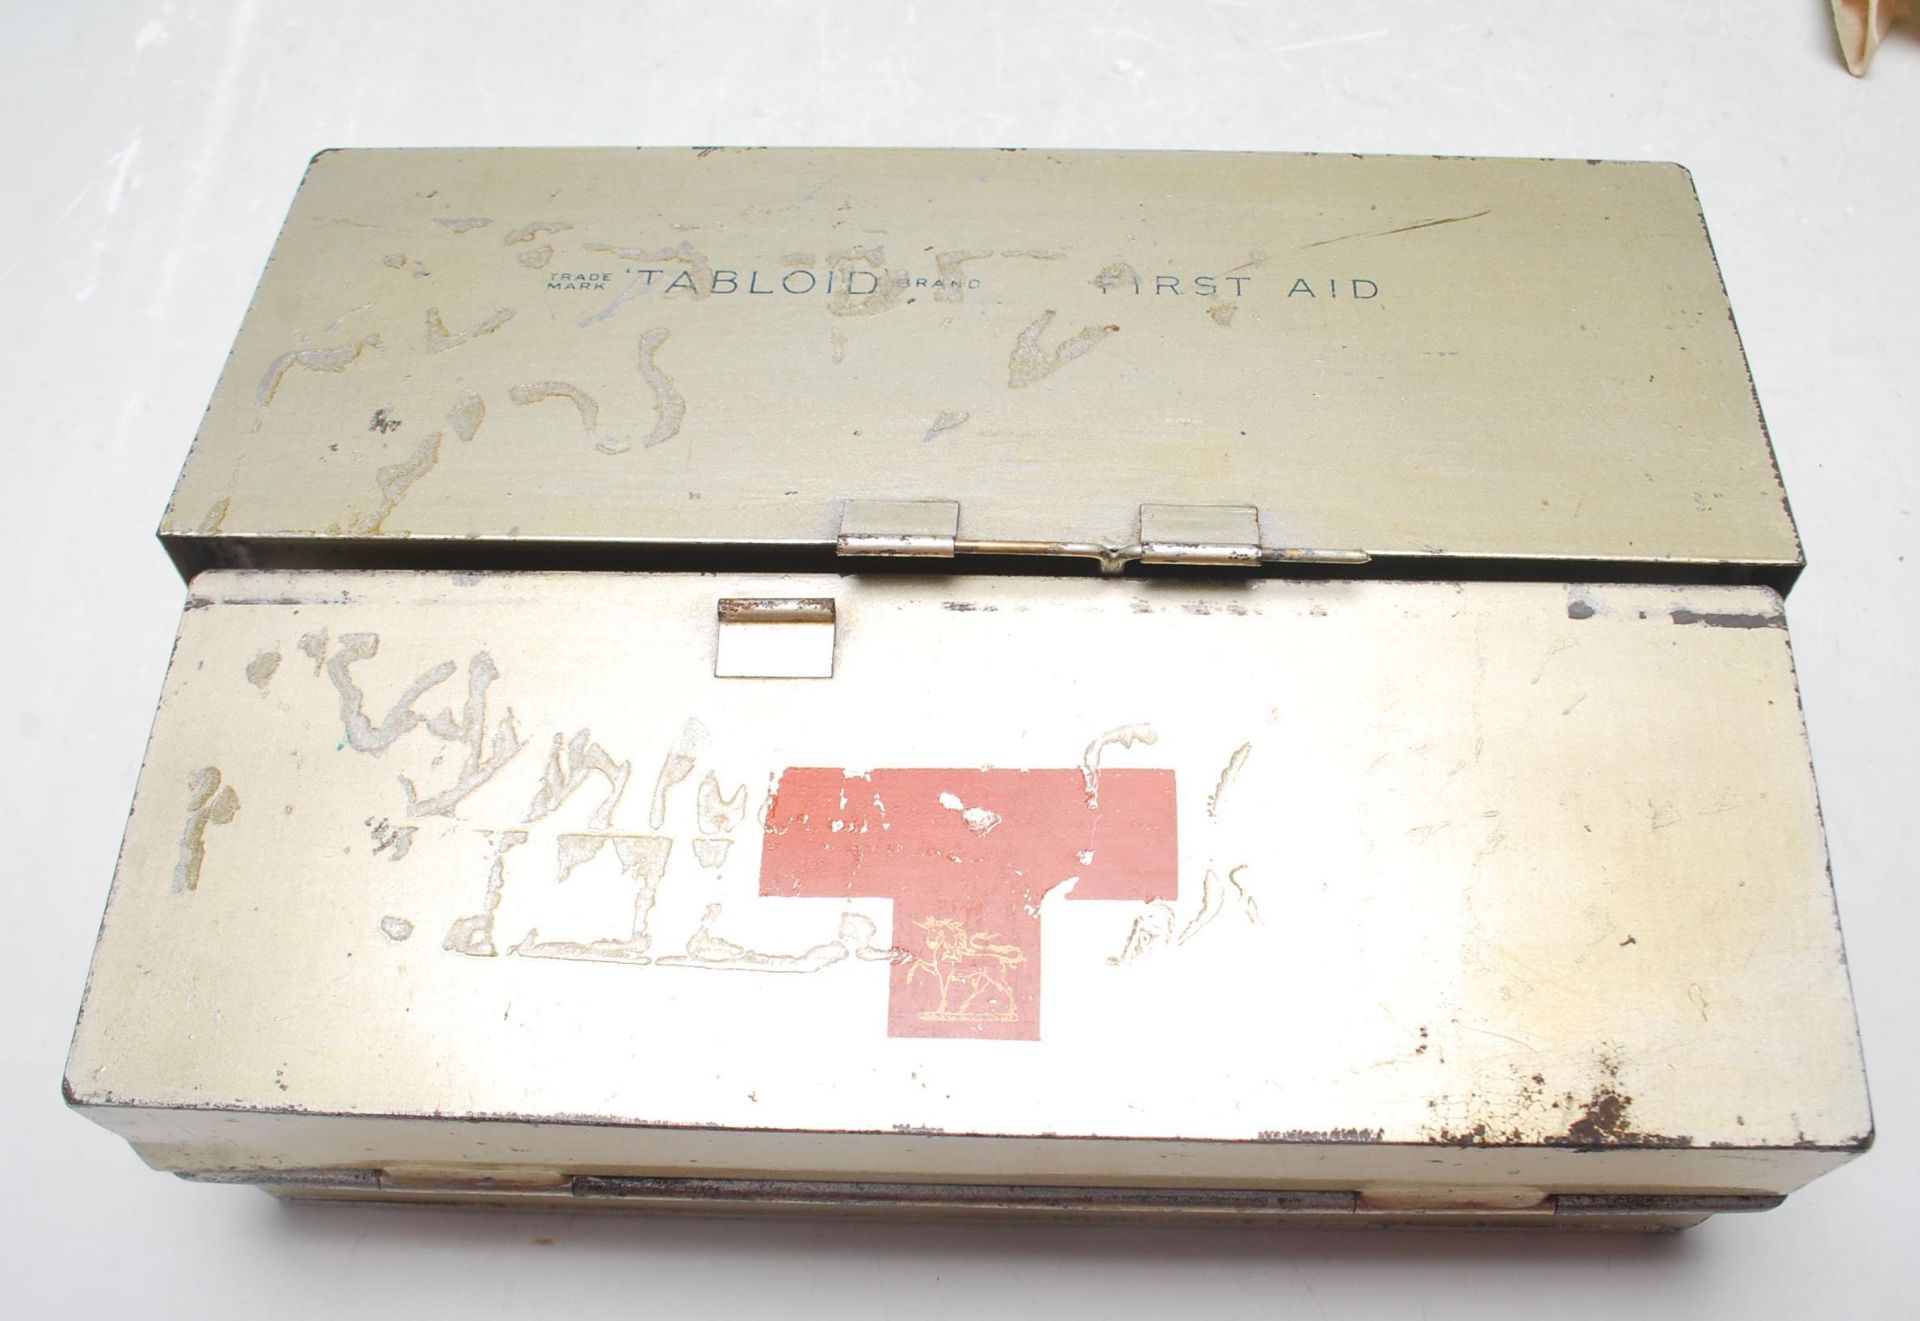 ANTIQUE EARLY 20TH CENTURY MILITARY FIRST AID KIT BY TABLOID - Image 2 of 12